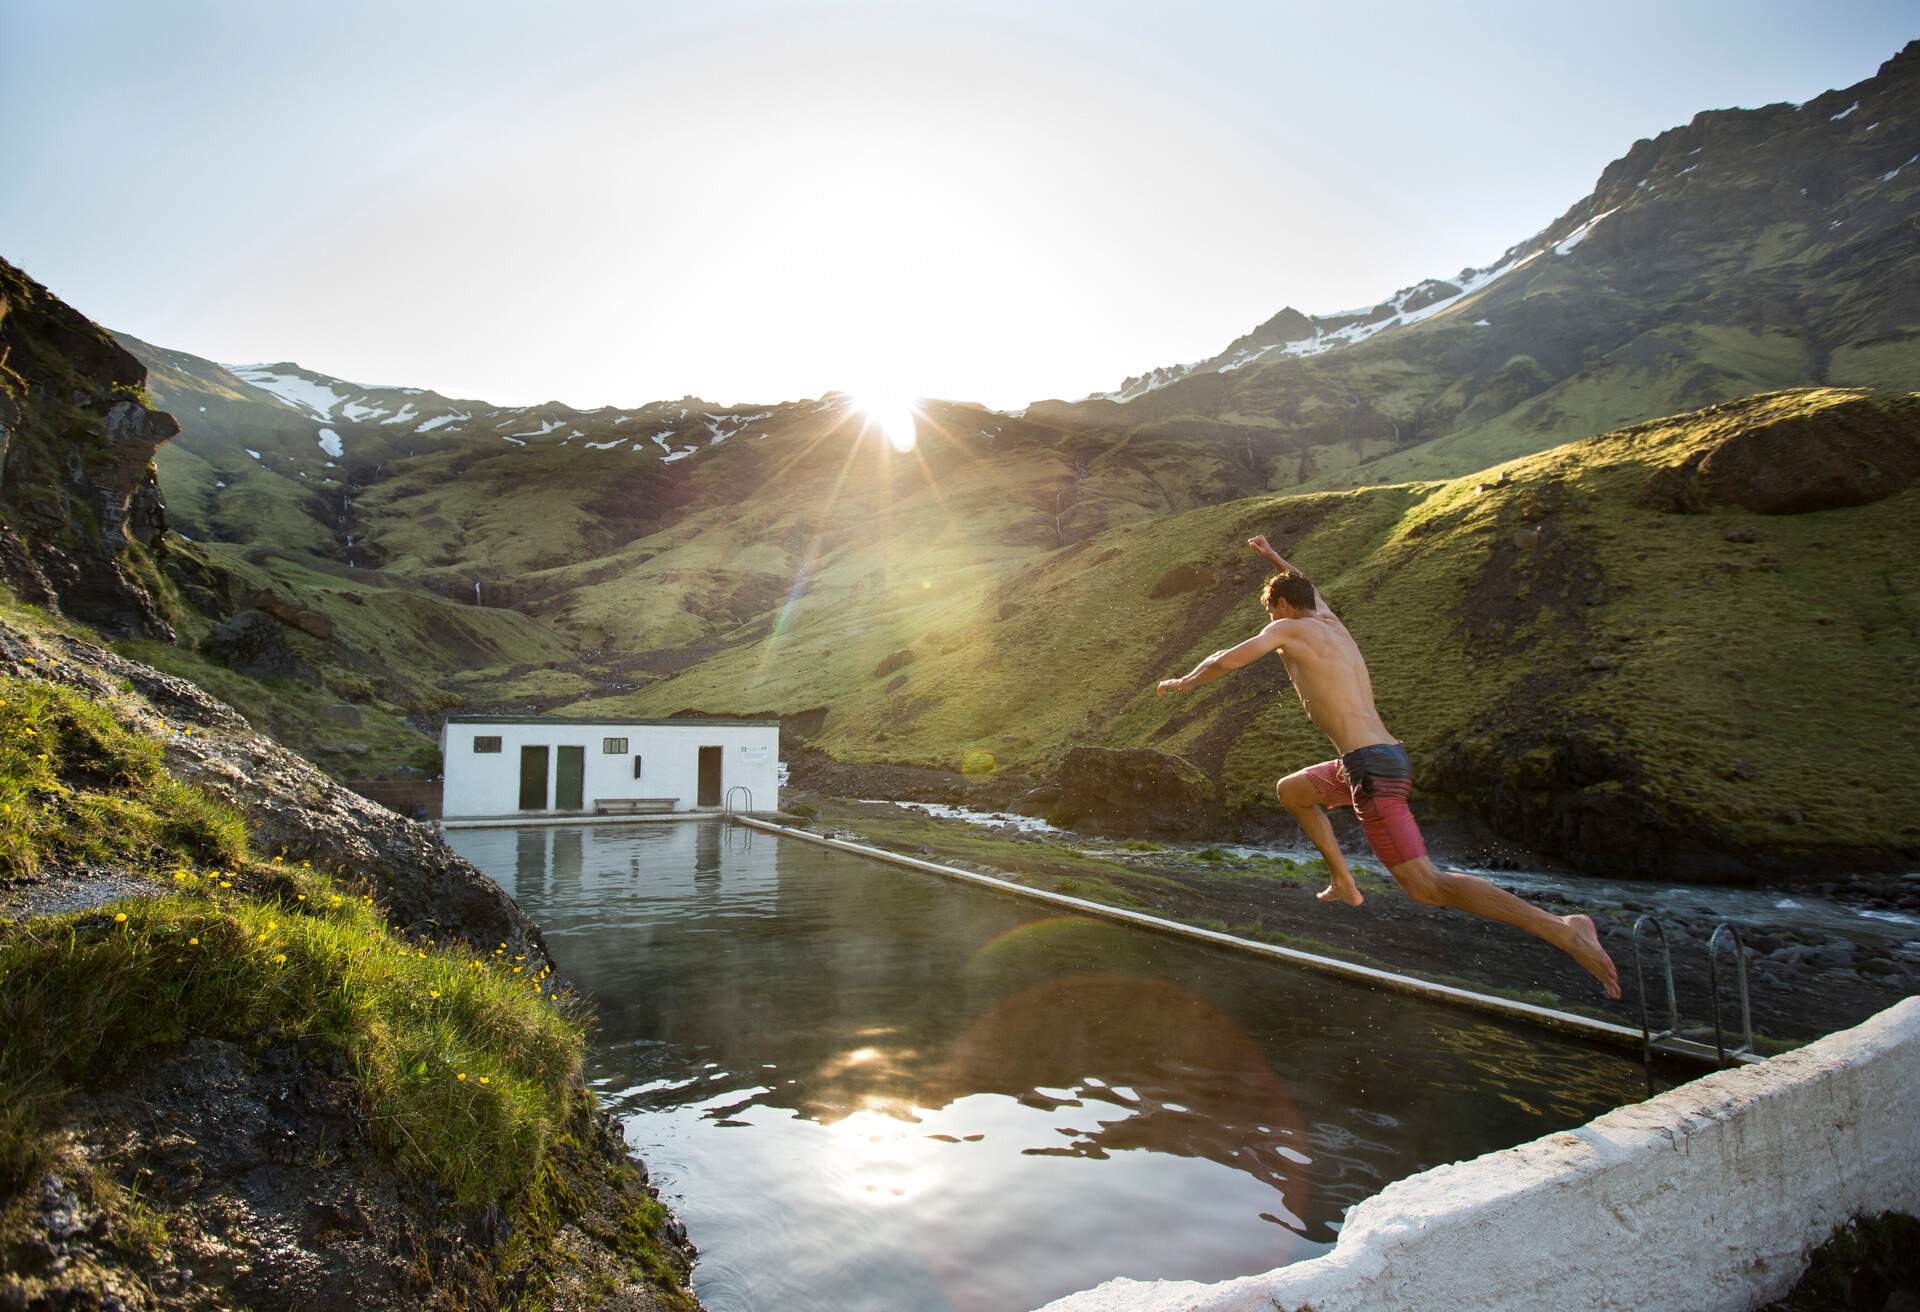 A man jumping into a hot spring in Iceland.